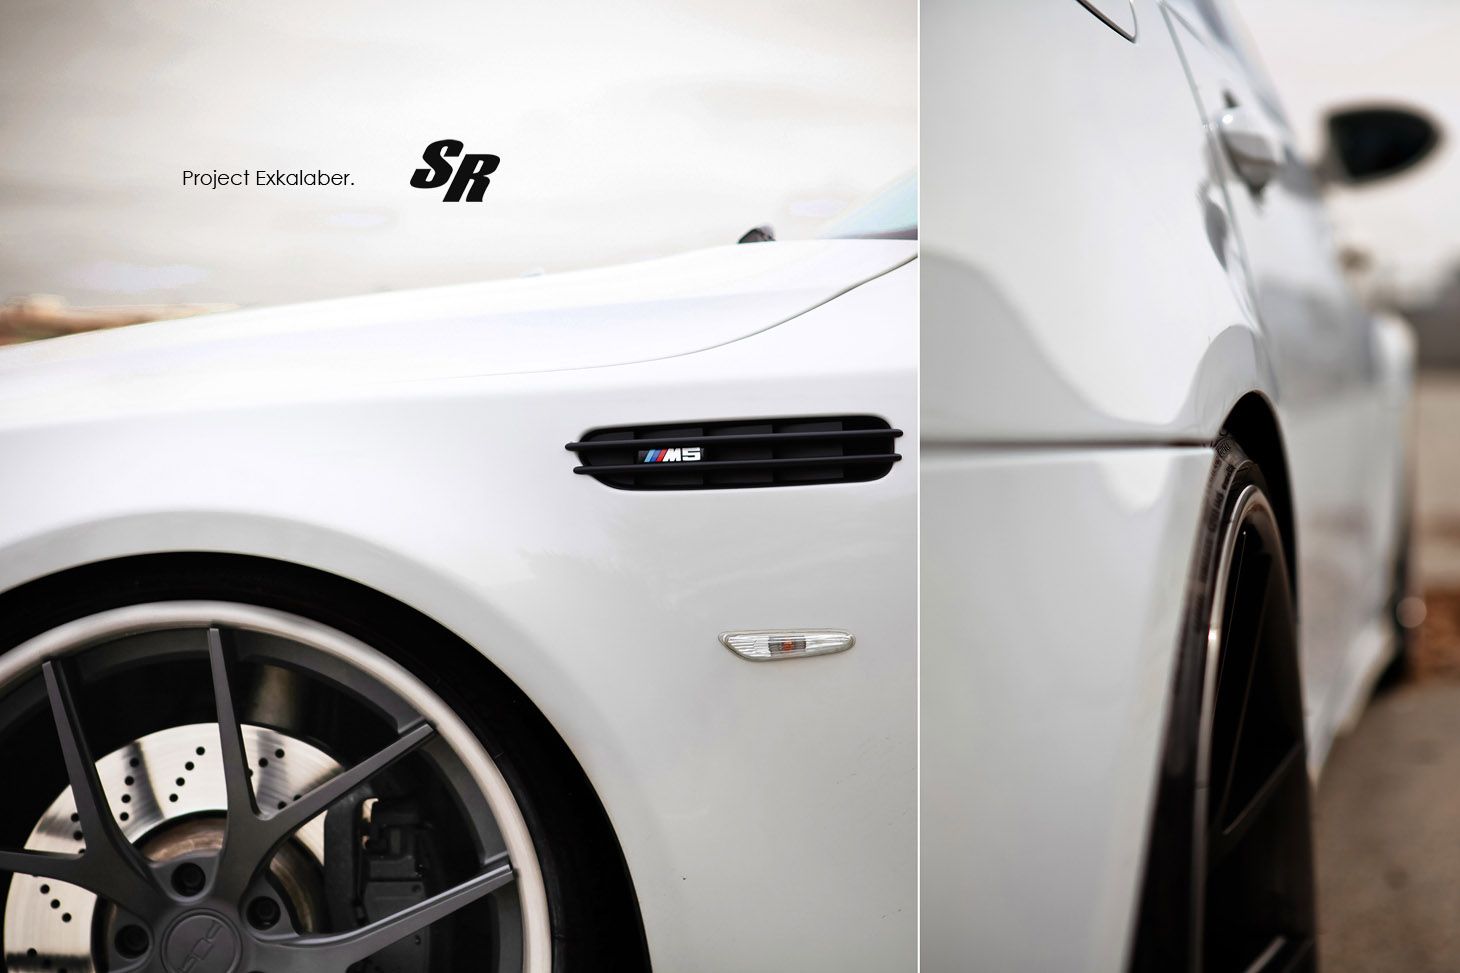 2010 BMW M5 Project Exkalaber by SR Auto Group